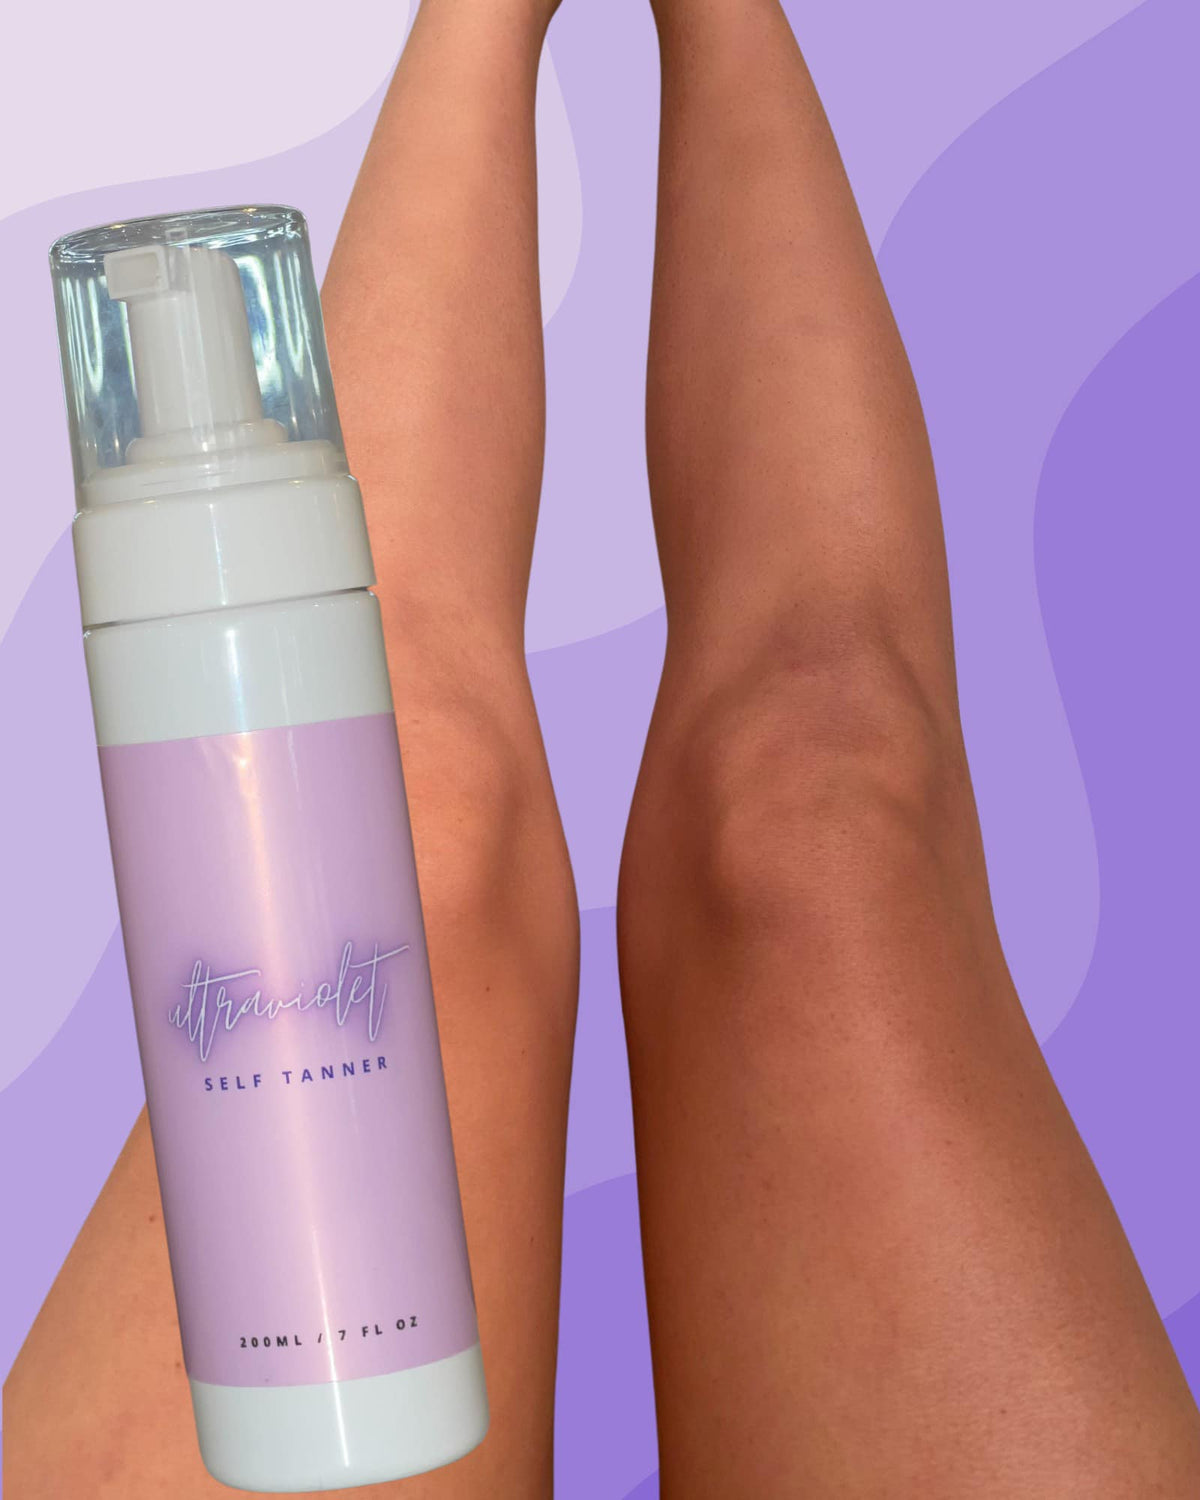 Ultra Violet Self Tanner-The perfect tanner is here! Every order comes with a free mitt for perfect application. Vegan-friendly cruelty-free, gluten-free, paraffin-free, alcohol-free, phthalate-free, silicone-free, sulfate-free, paraben free. Located in Chenoa, Illinois about 20 minutes outside of Bloomington & Normal, IL in McLean County. Free Shipping on eligible Orders. Shop Pay Accepted-VerClare Boutique, Chenoa Illinois